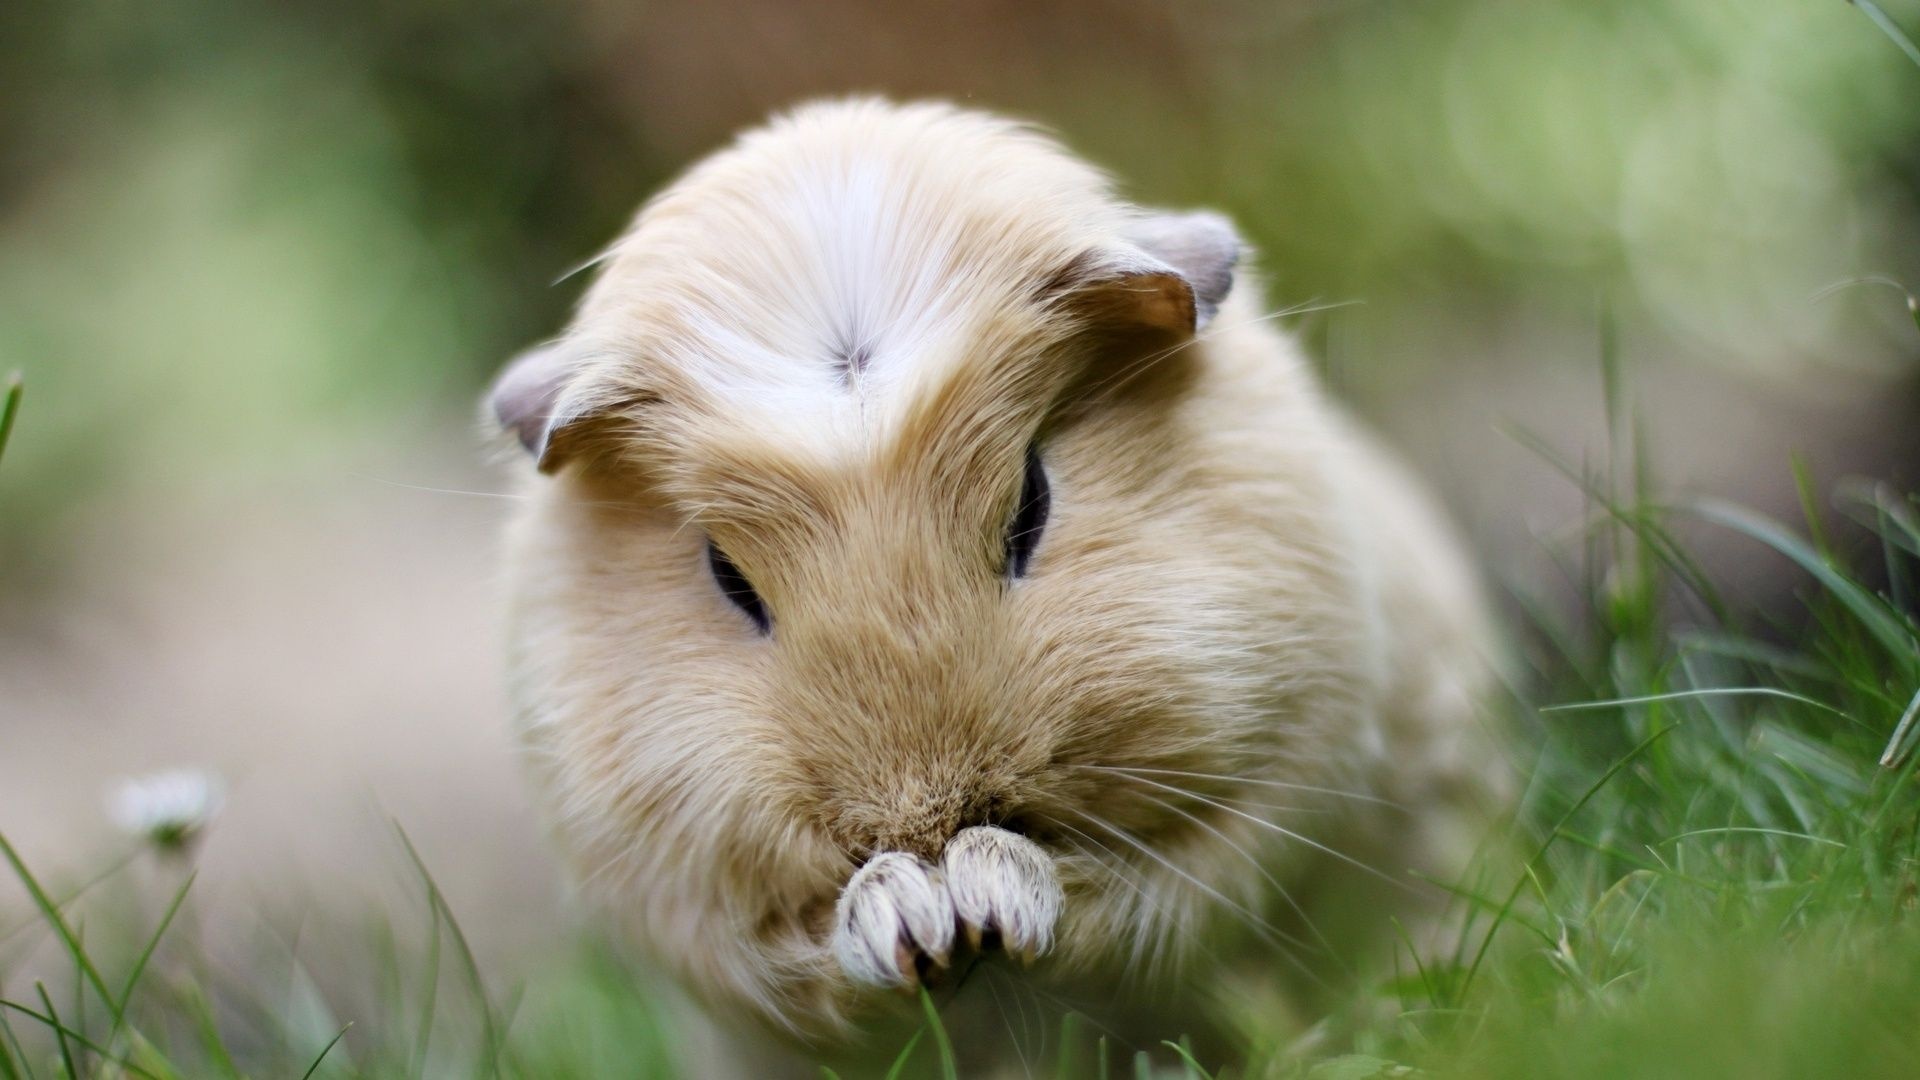 Guinea Pig, Baby pig wallpapers, Small animals, Adorable pictures, 1920x1080 Full HD Desktop